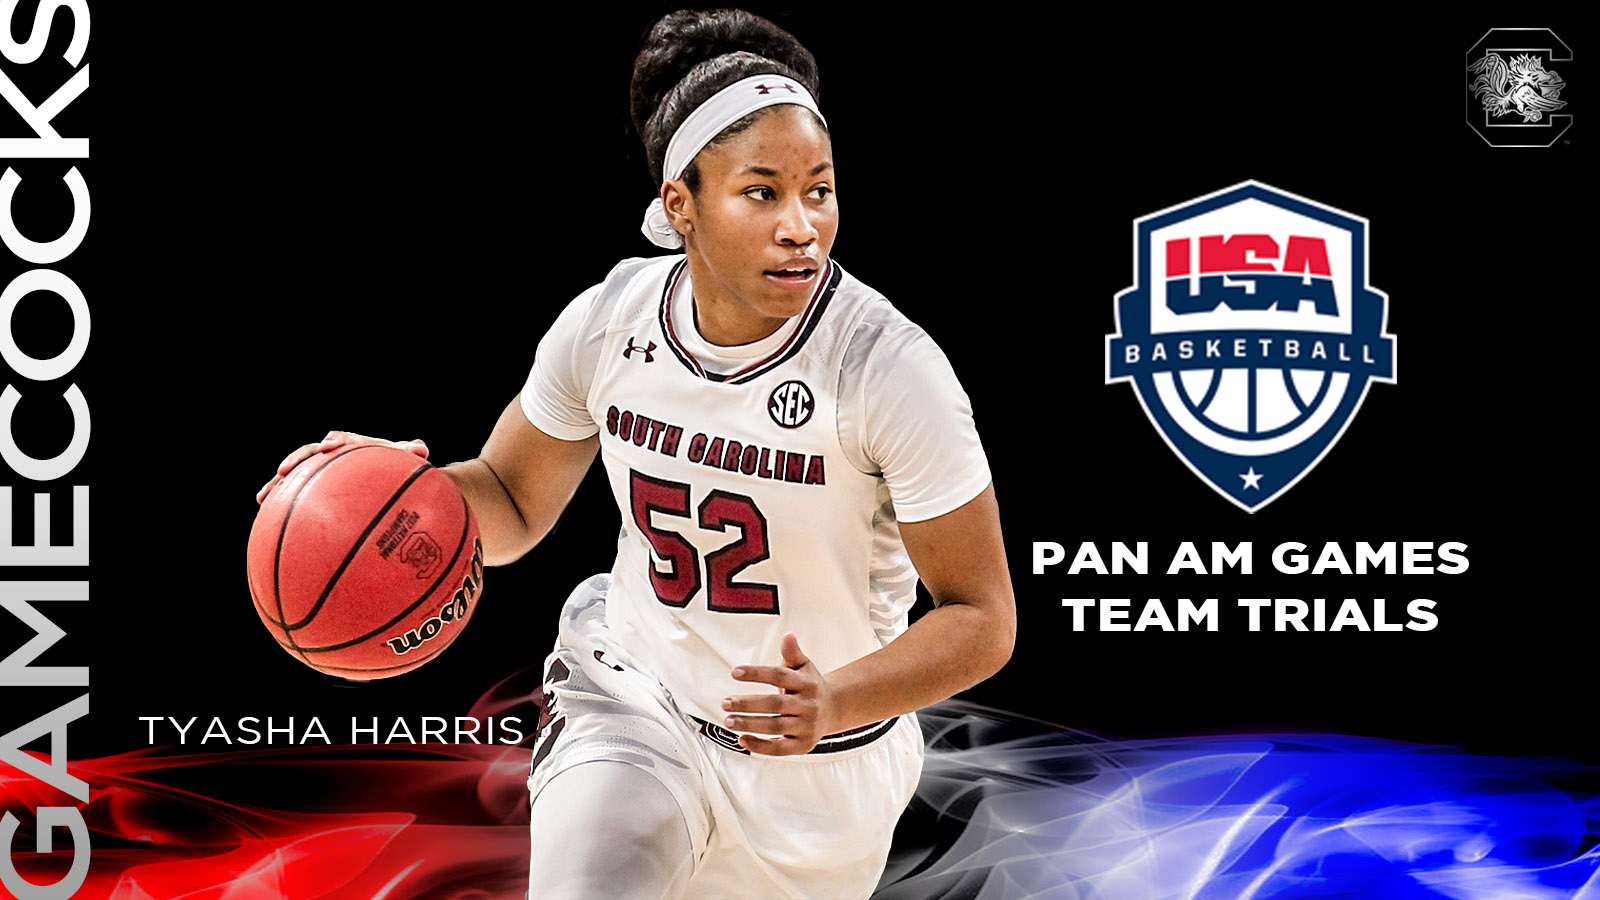 Harris to Compete at USAB Pan Am Games Trials